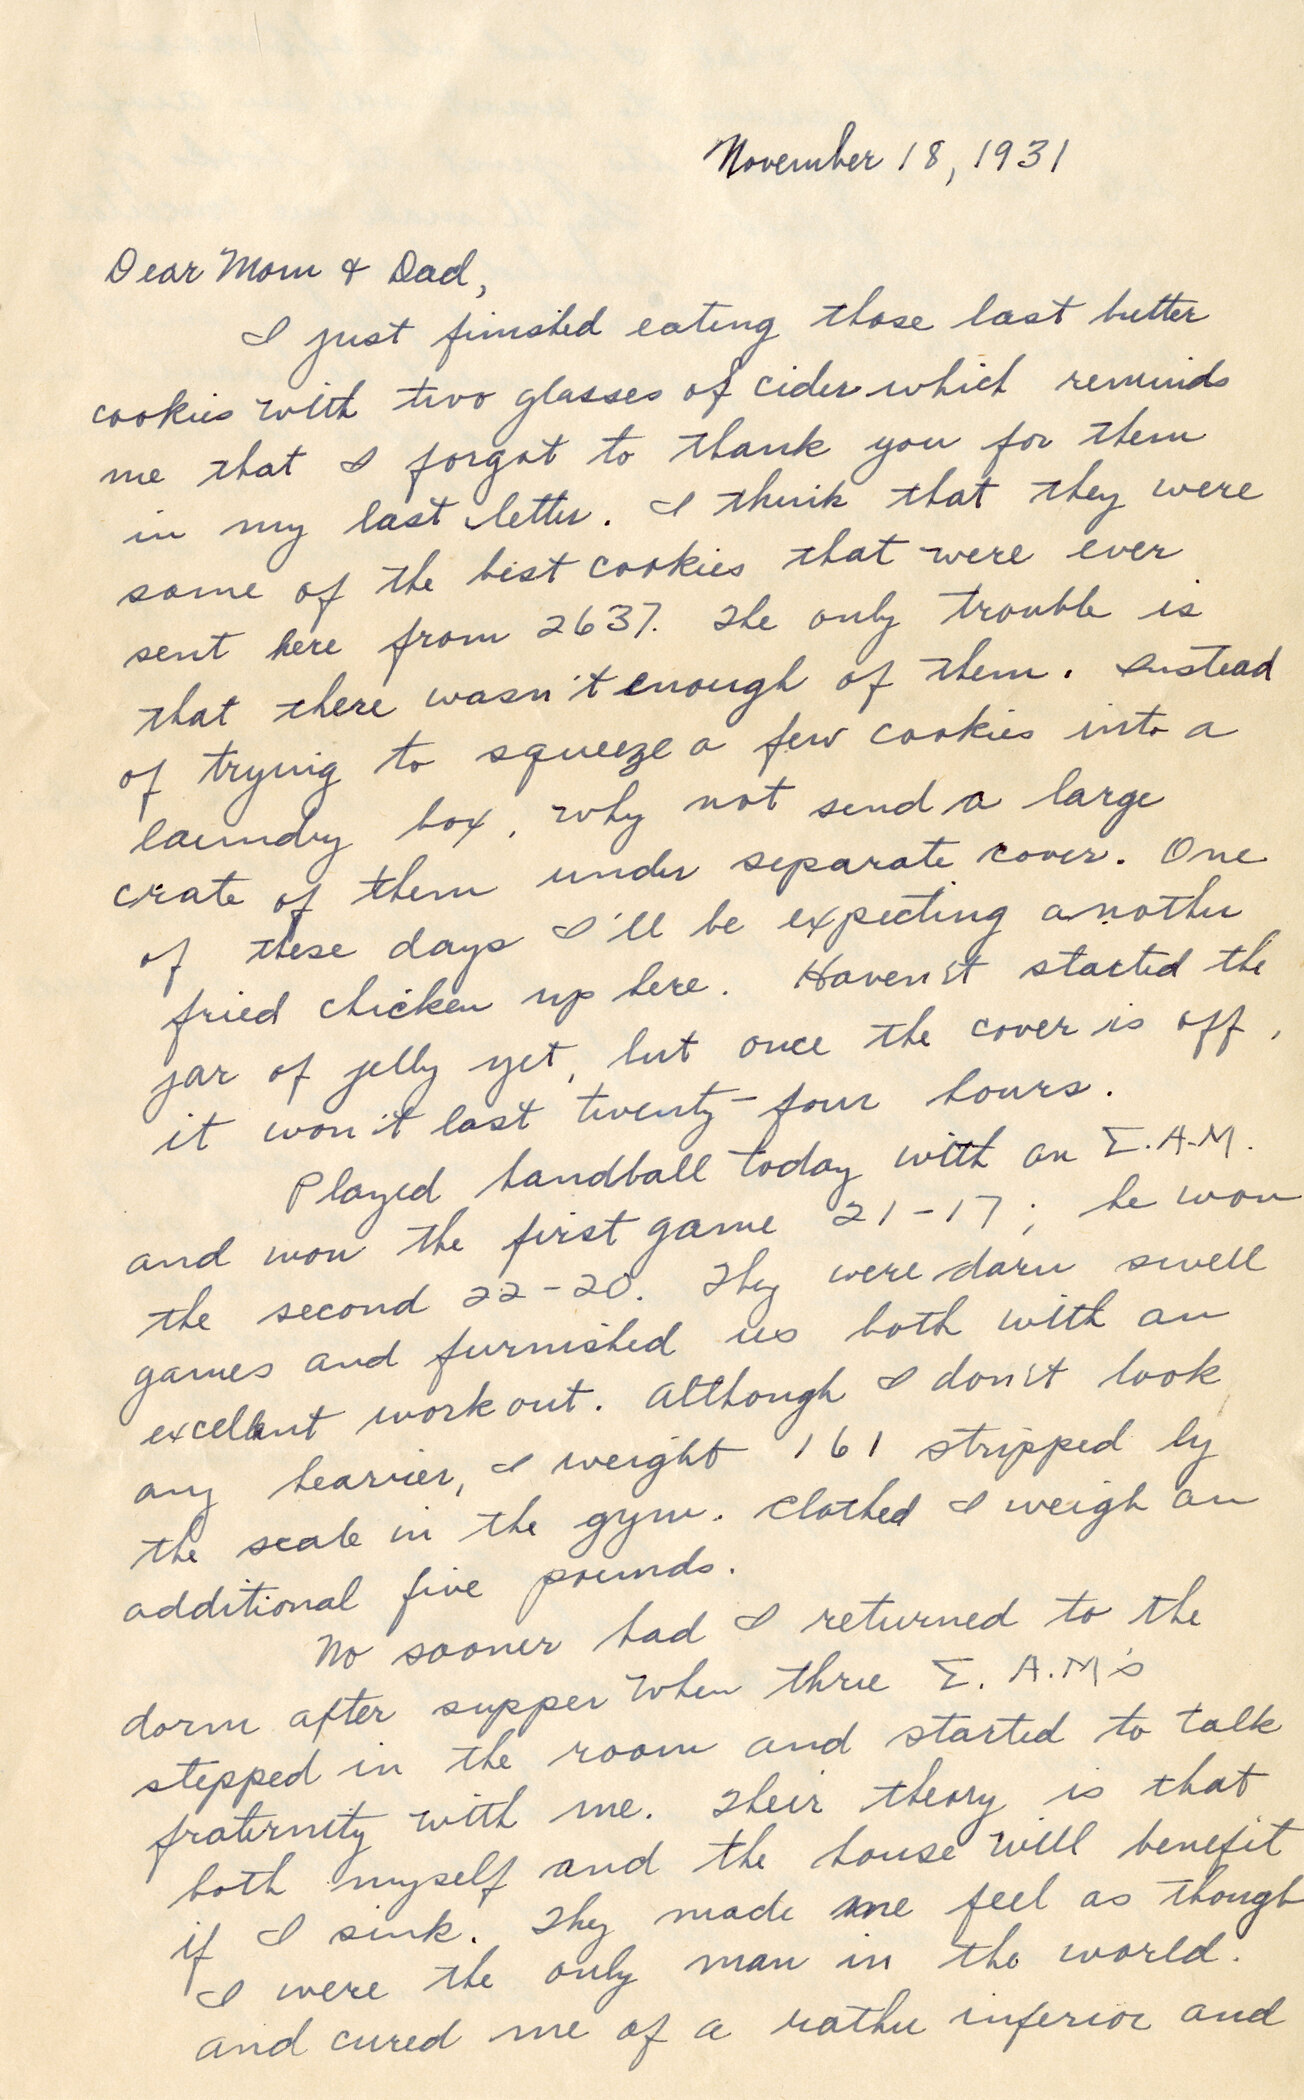 Richard Campen Letter to his Parents Expressing the Desire to Join a Fraternity